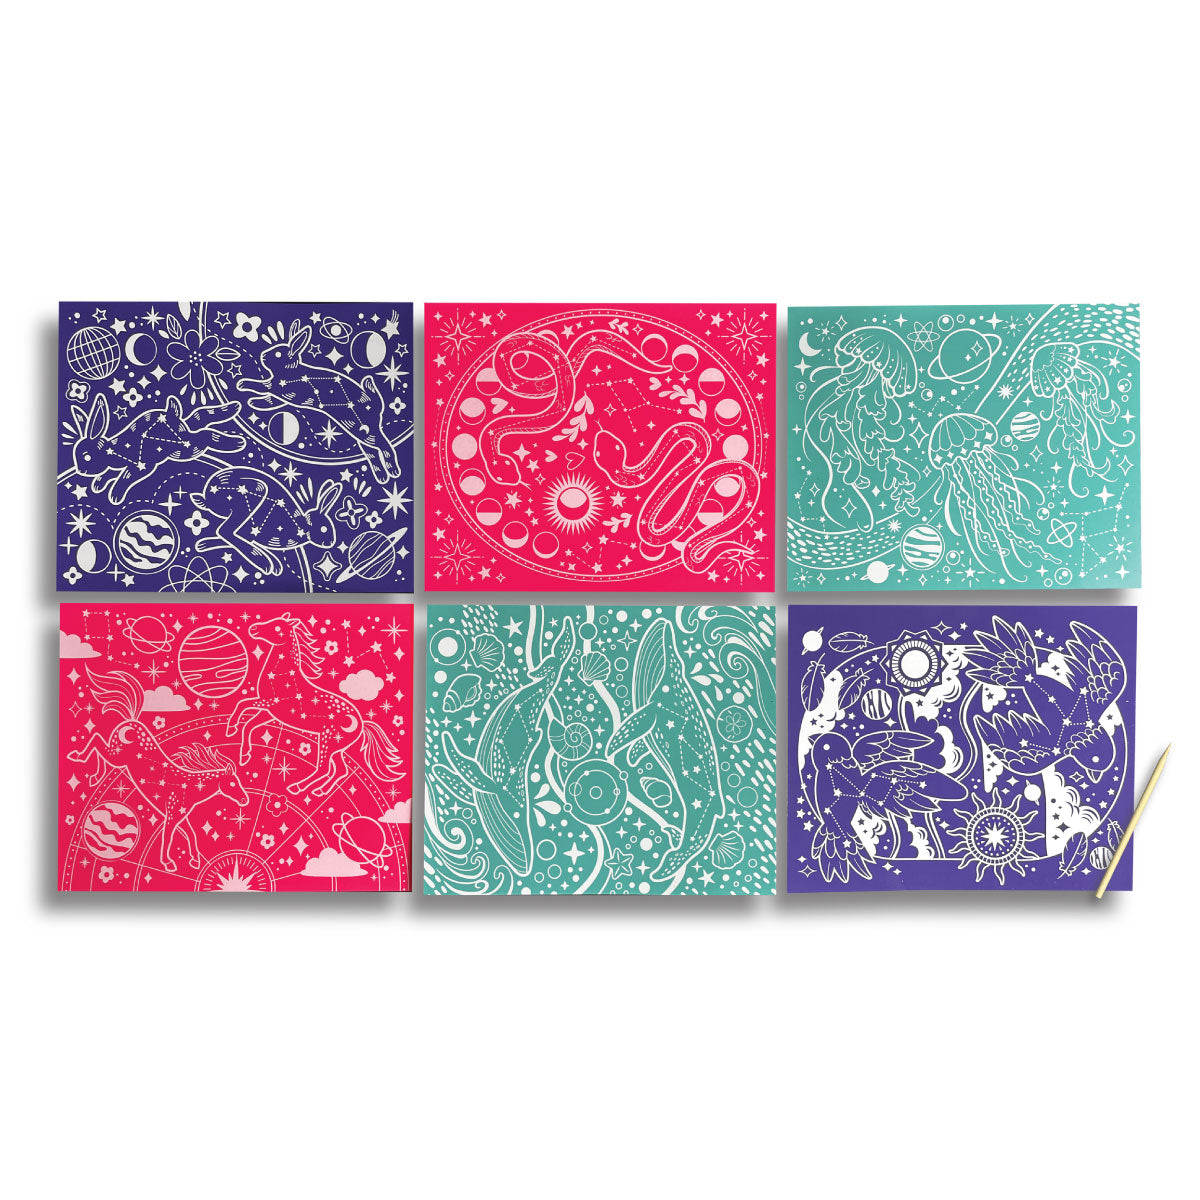 Ooly Scratch And Shine Foil Scratch Art Kit - Celestial Skies